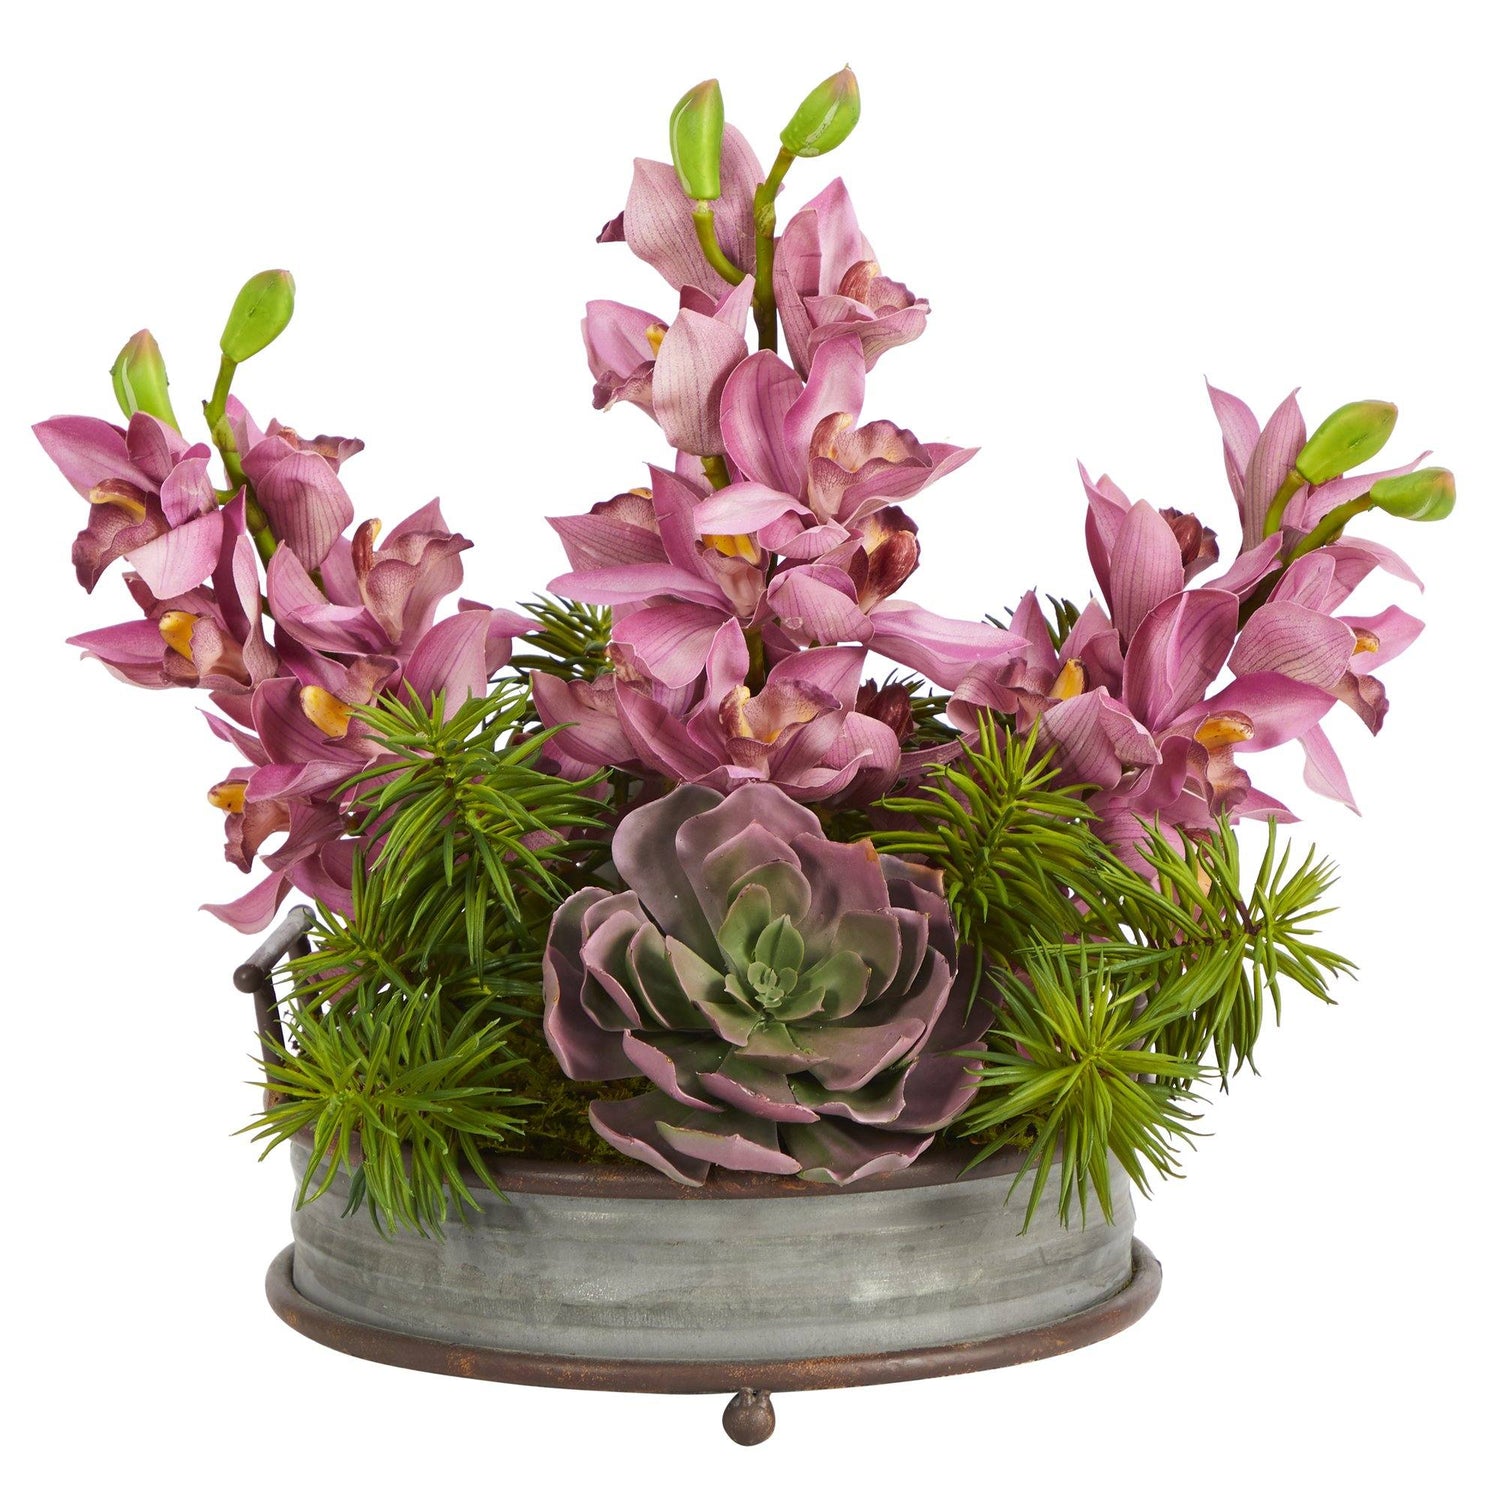 18” Cymbidium Orchid and Echeveria Succulent Artificial Arrangement in Metal Tray with Copper Trimming